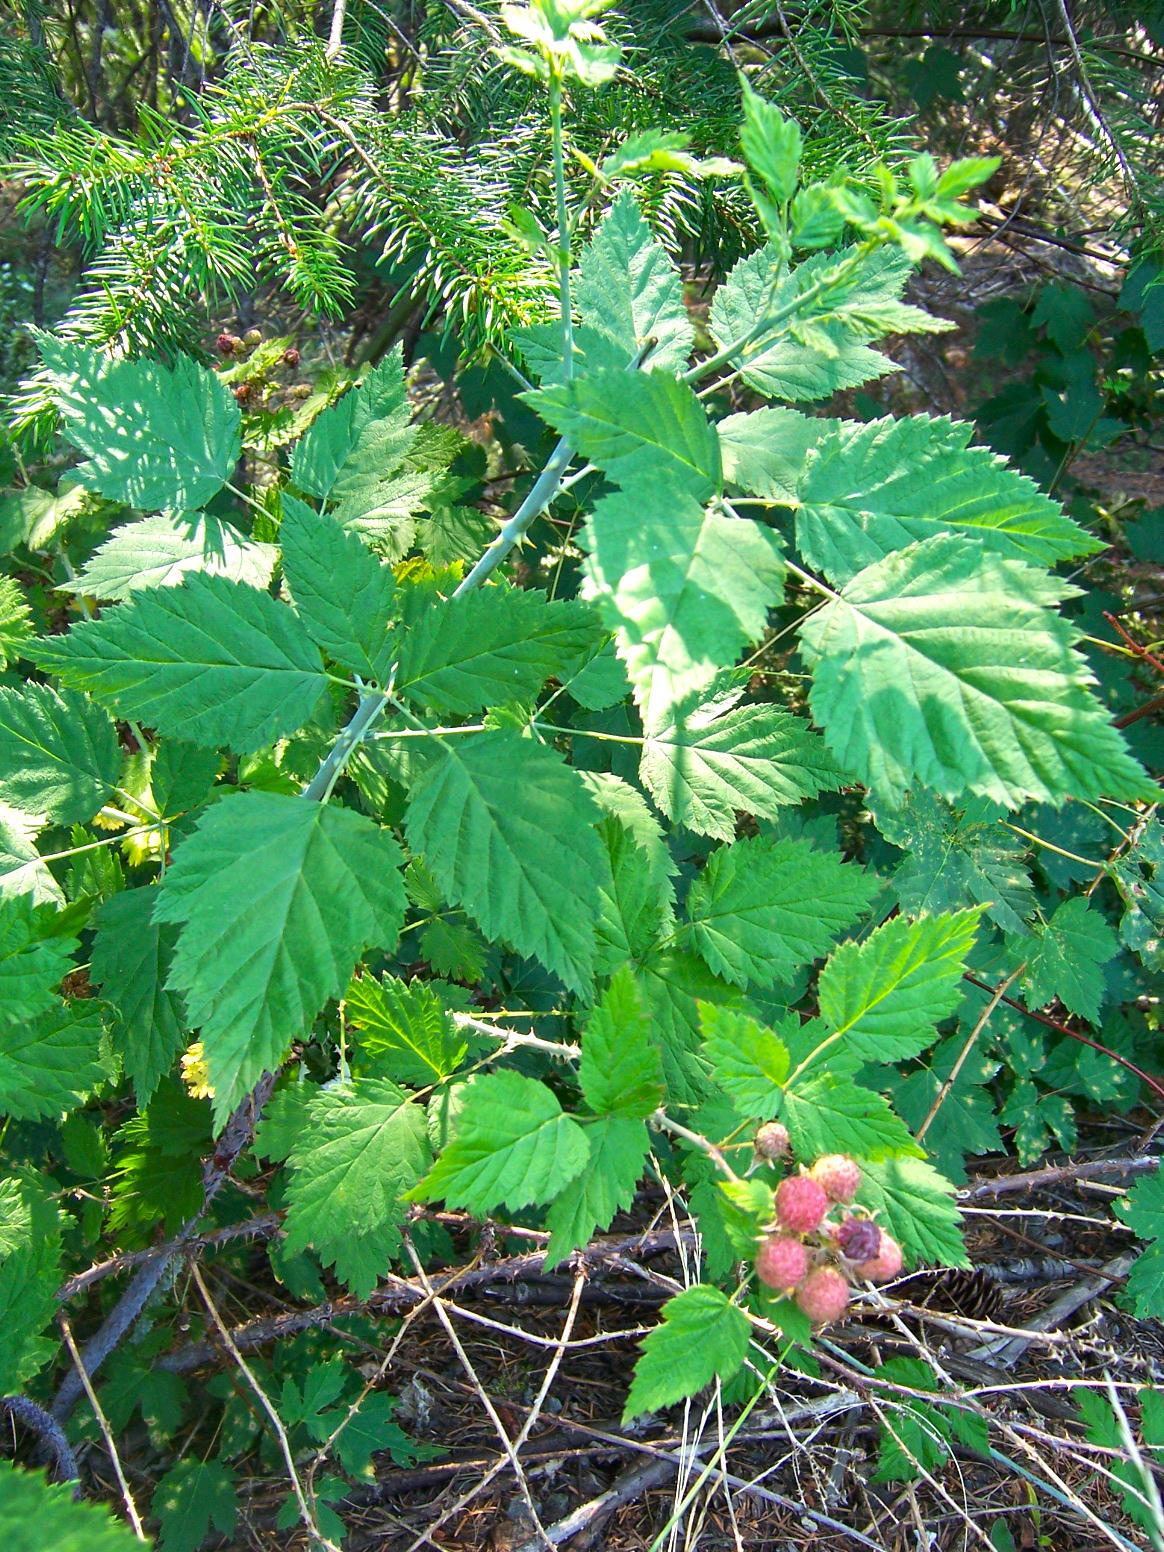 Native black raspberry showing immature fruit and characteristic purple canes with spines